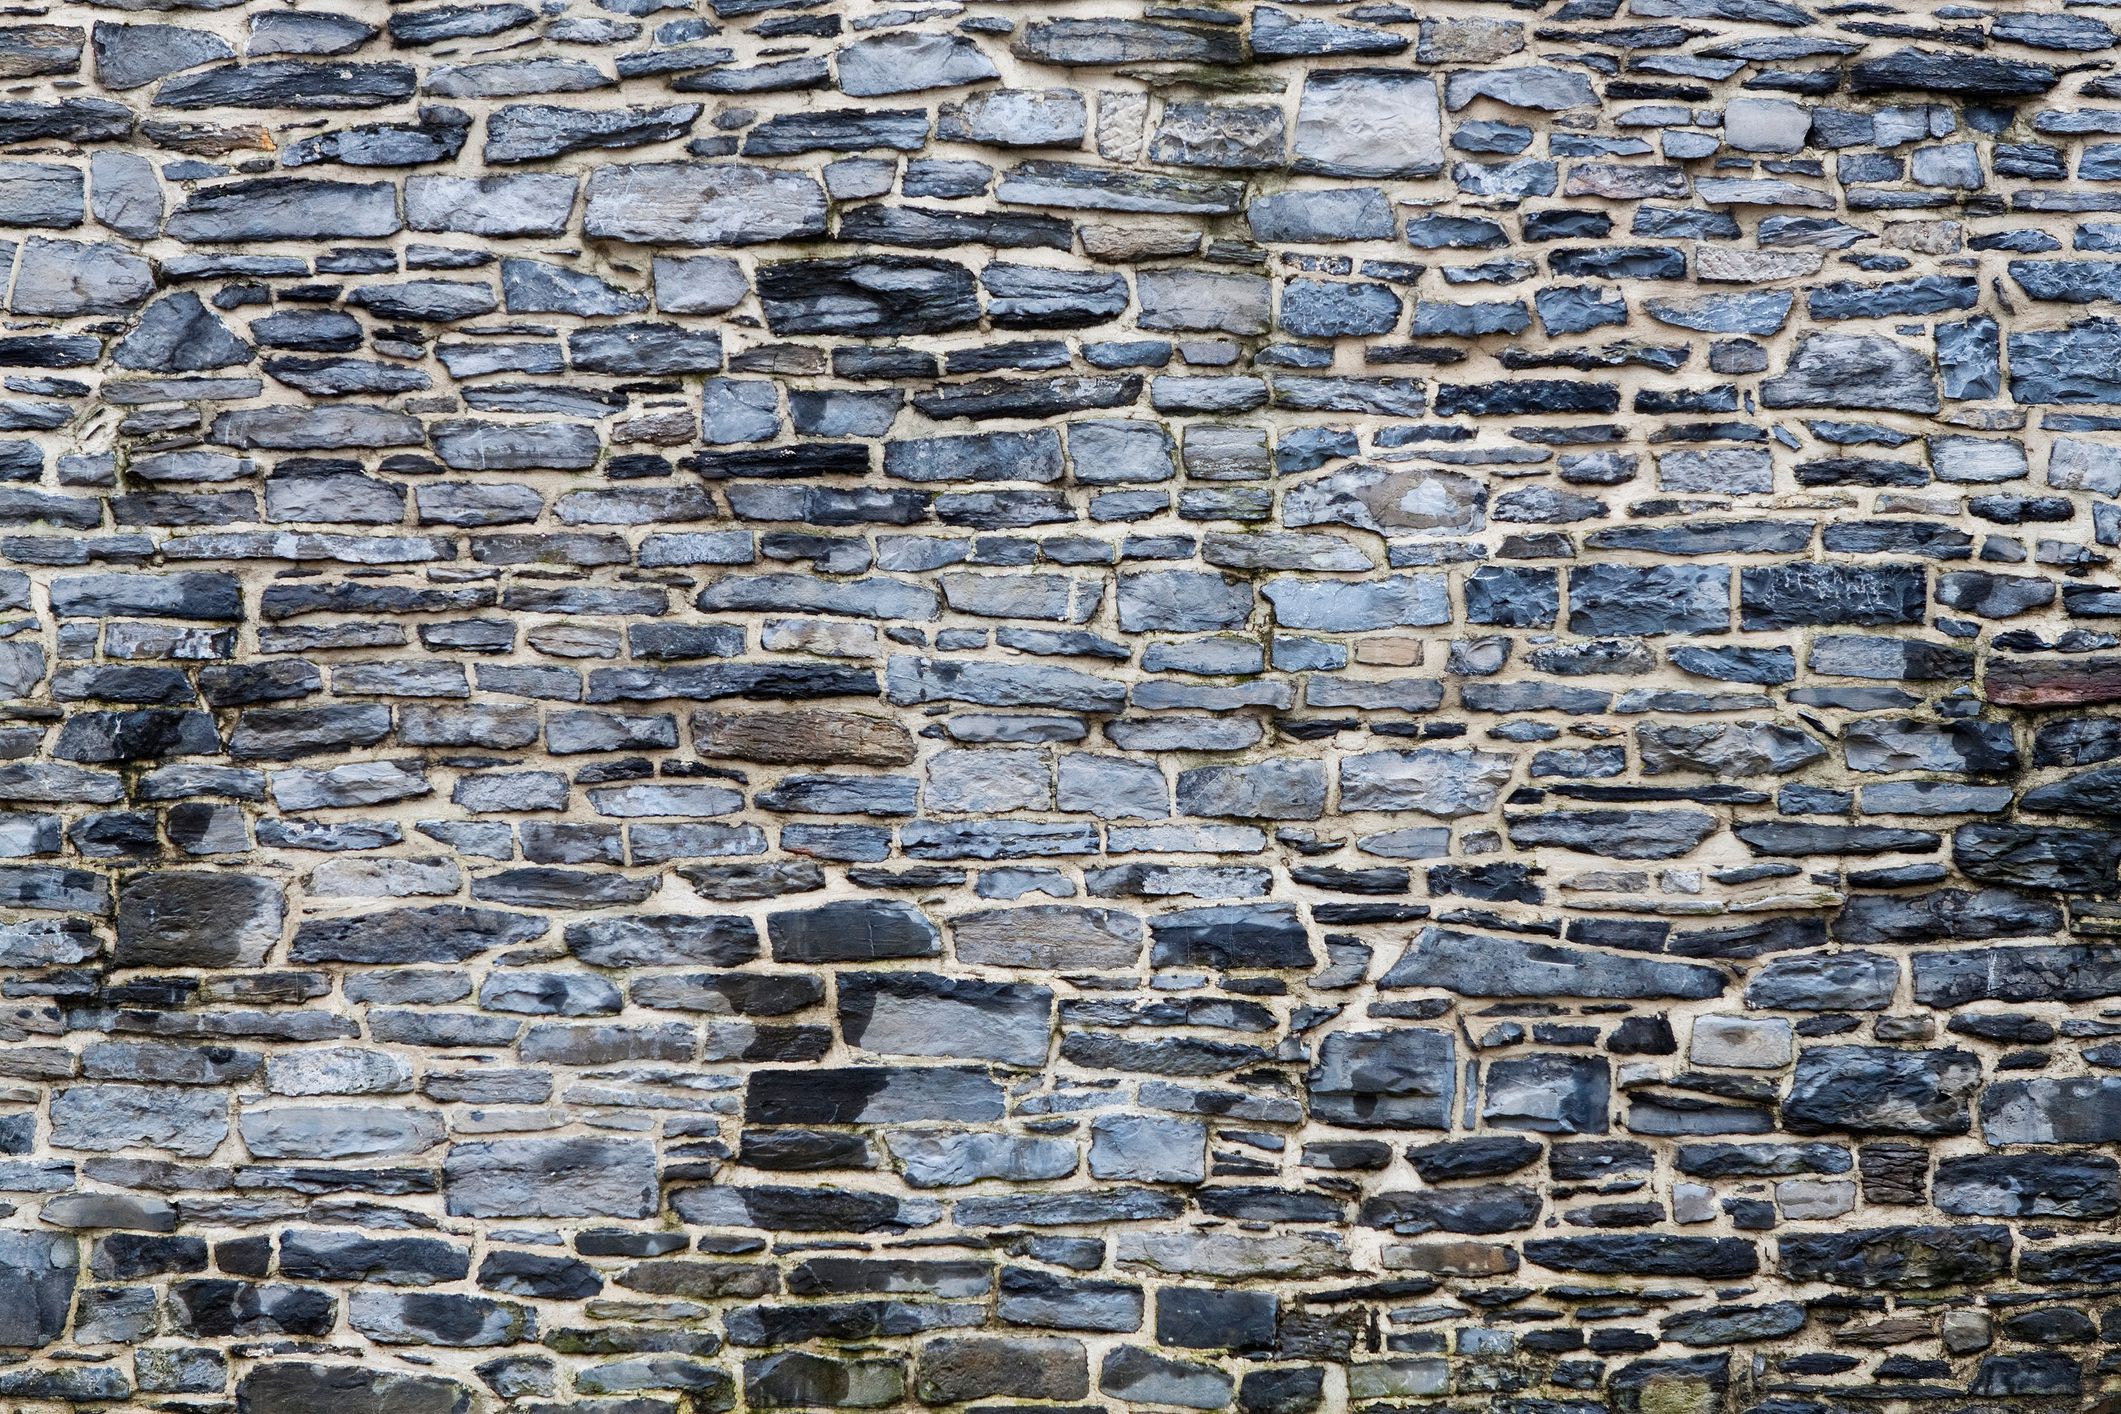 How to Build Mortared Stone Walls